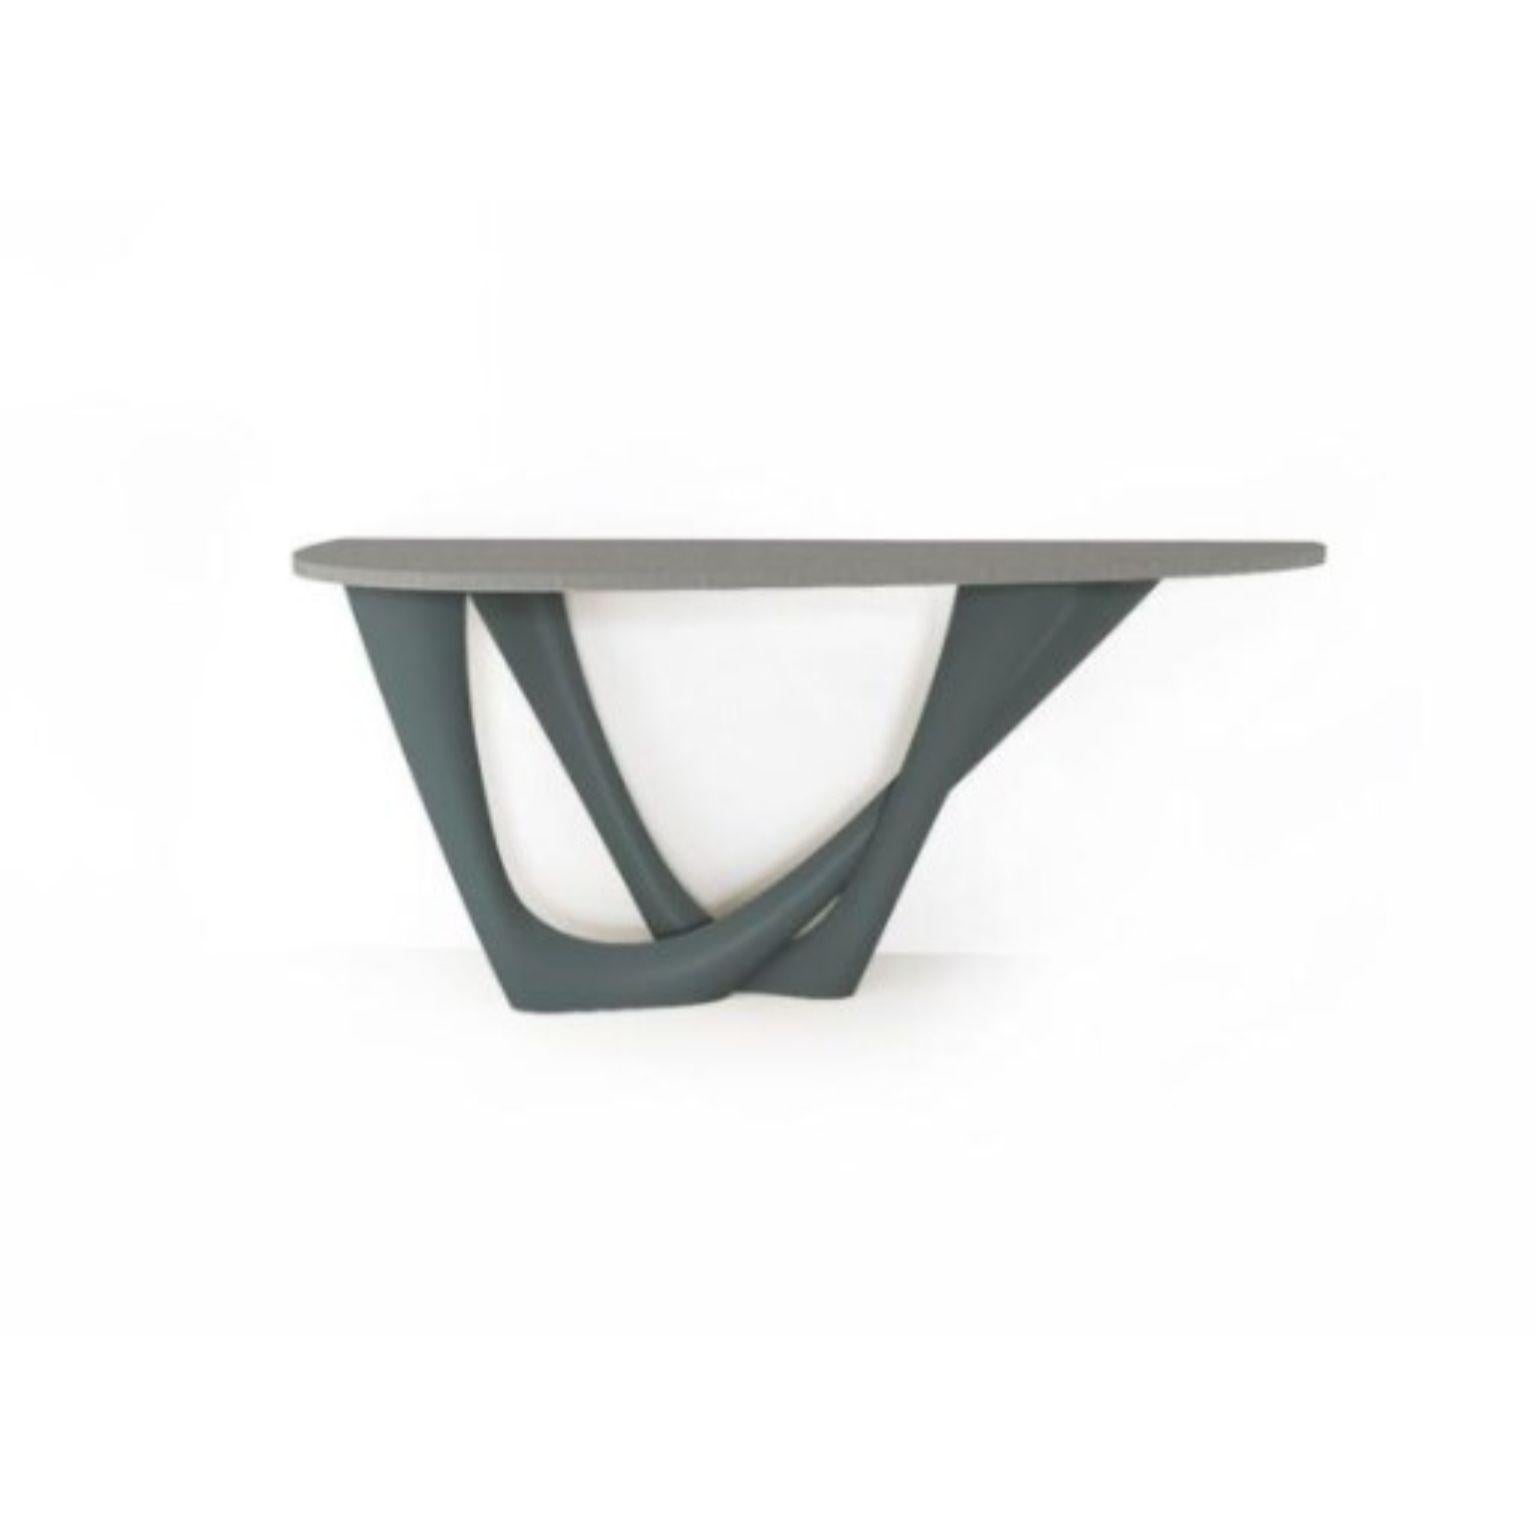 Blue Grey G-Console Duo concrete top and steel base by Zieta
Dimensions: D 56 x W 168 x H 75 cm 
Material: Carbon steel, concrete.
Also available in different colors and dimensions.

G-Console is another bionic object in our collection. Created for